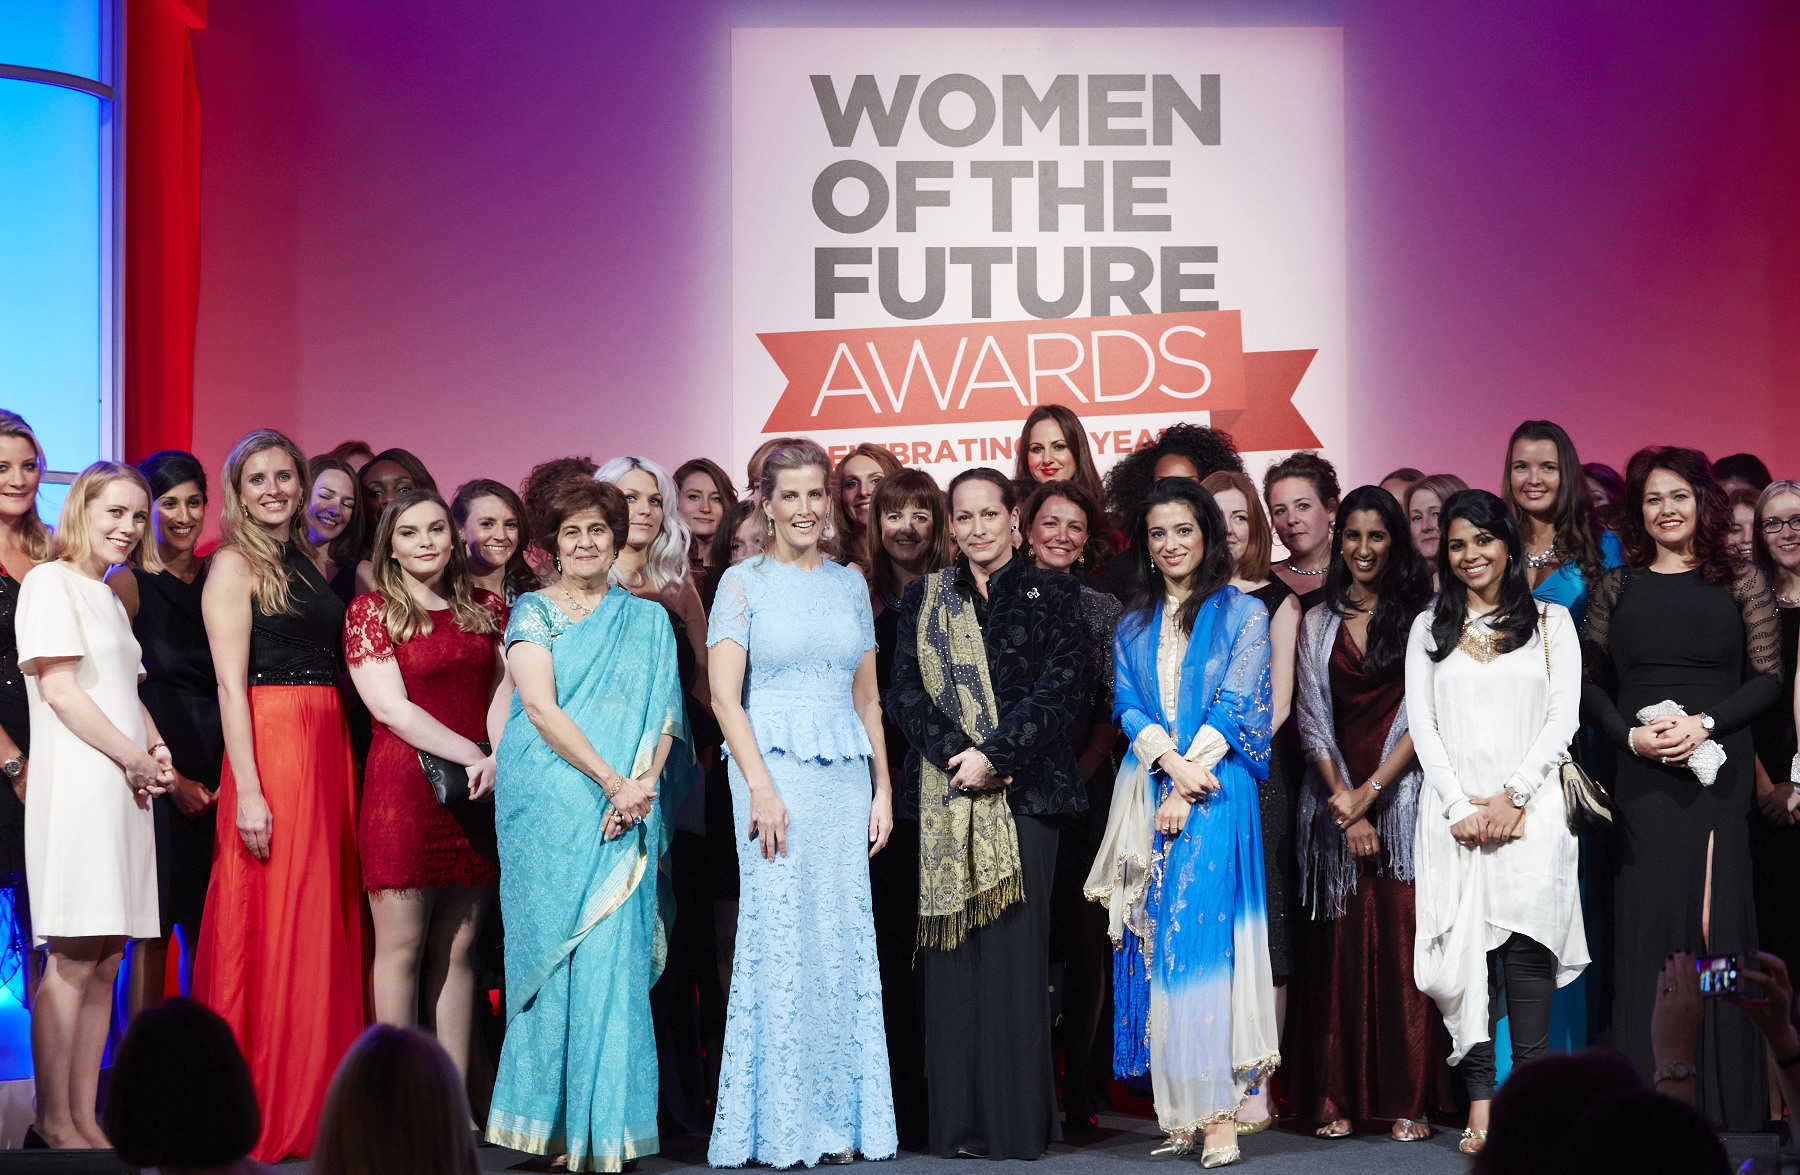 Her Royal Highness The Countess of Wessex announced as Women of the Future’s official Ambassador